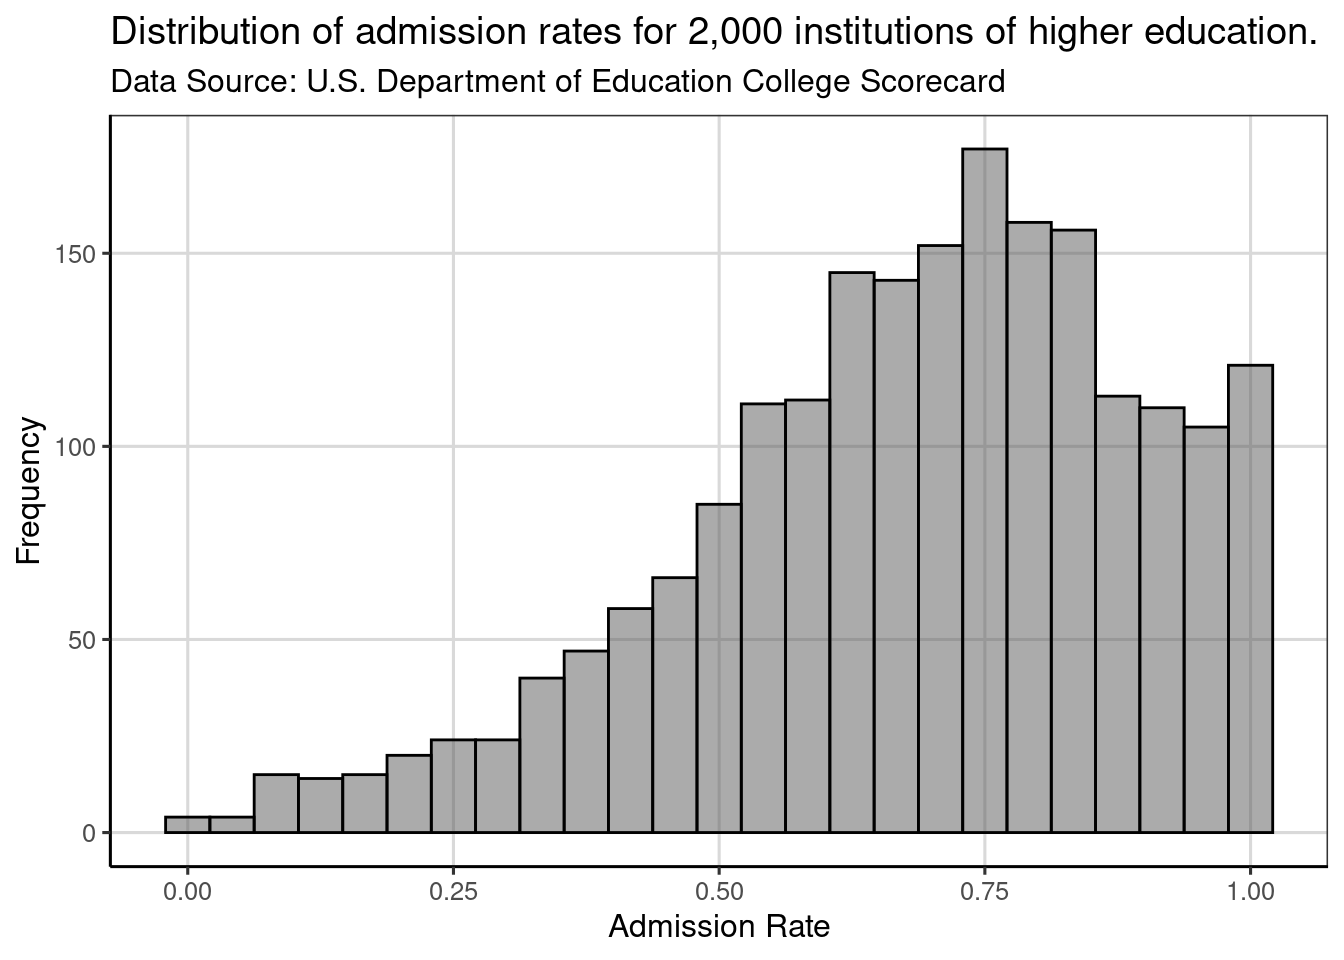 Histogram showing distribution of admission rates for institutions of higher education.